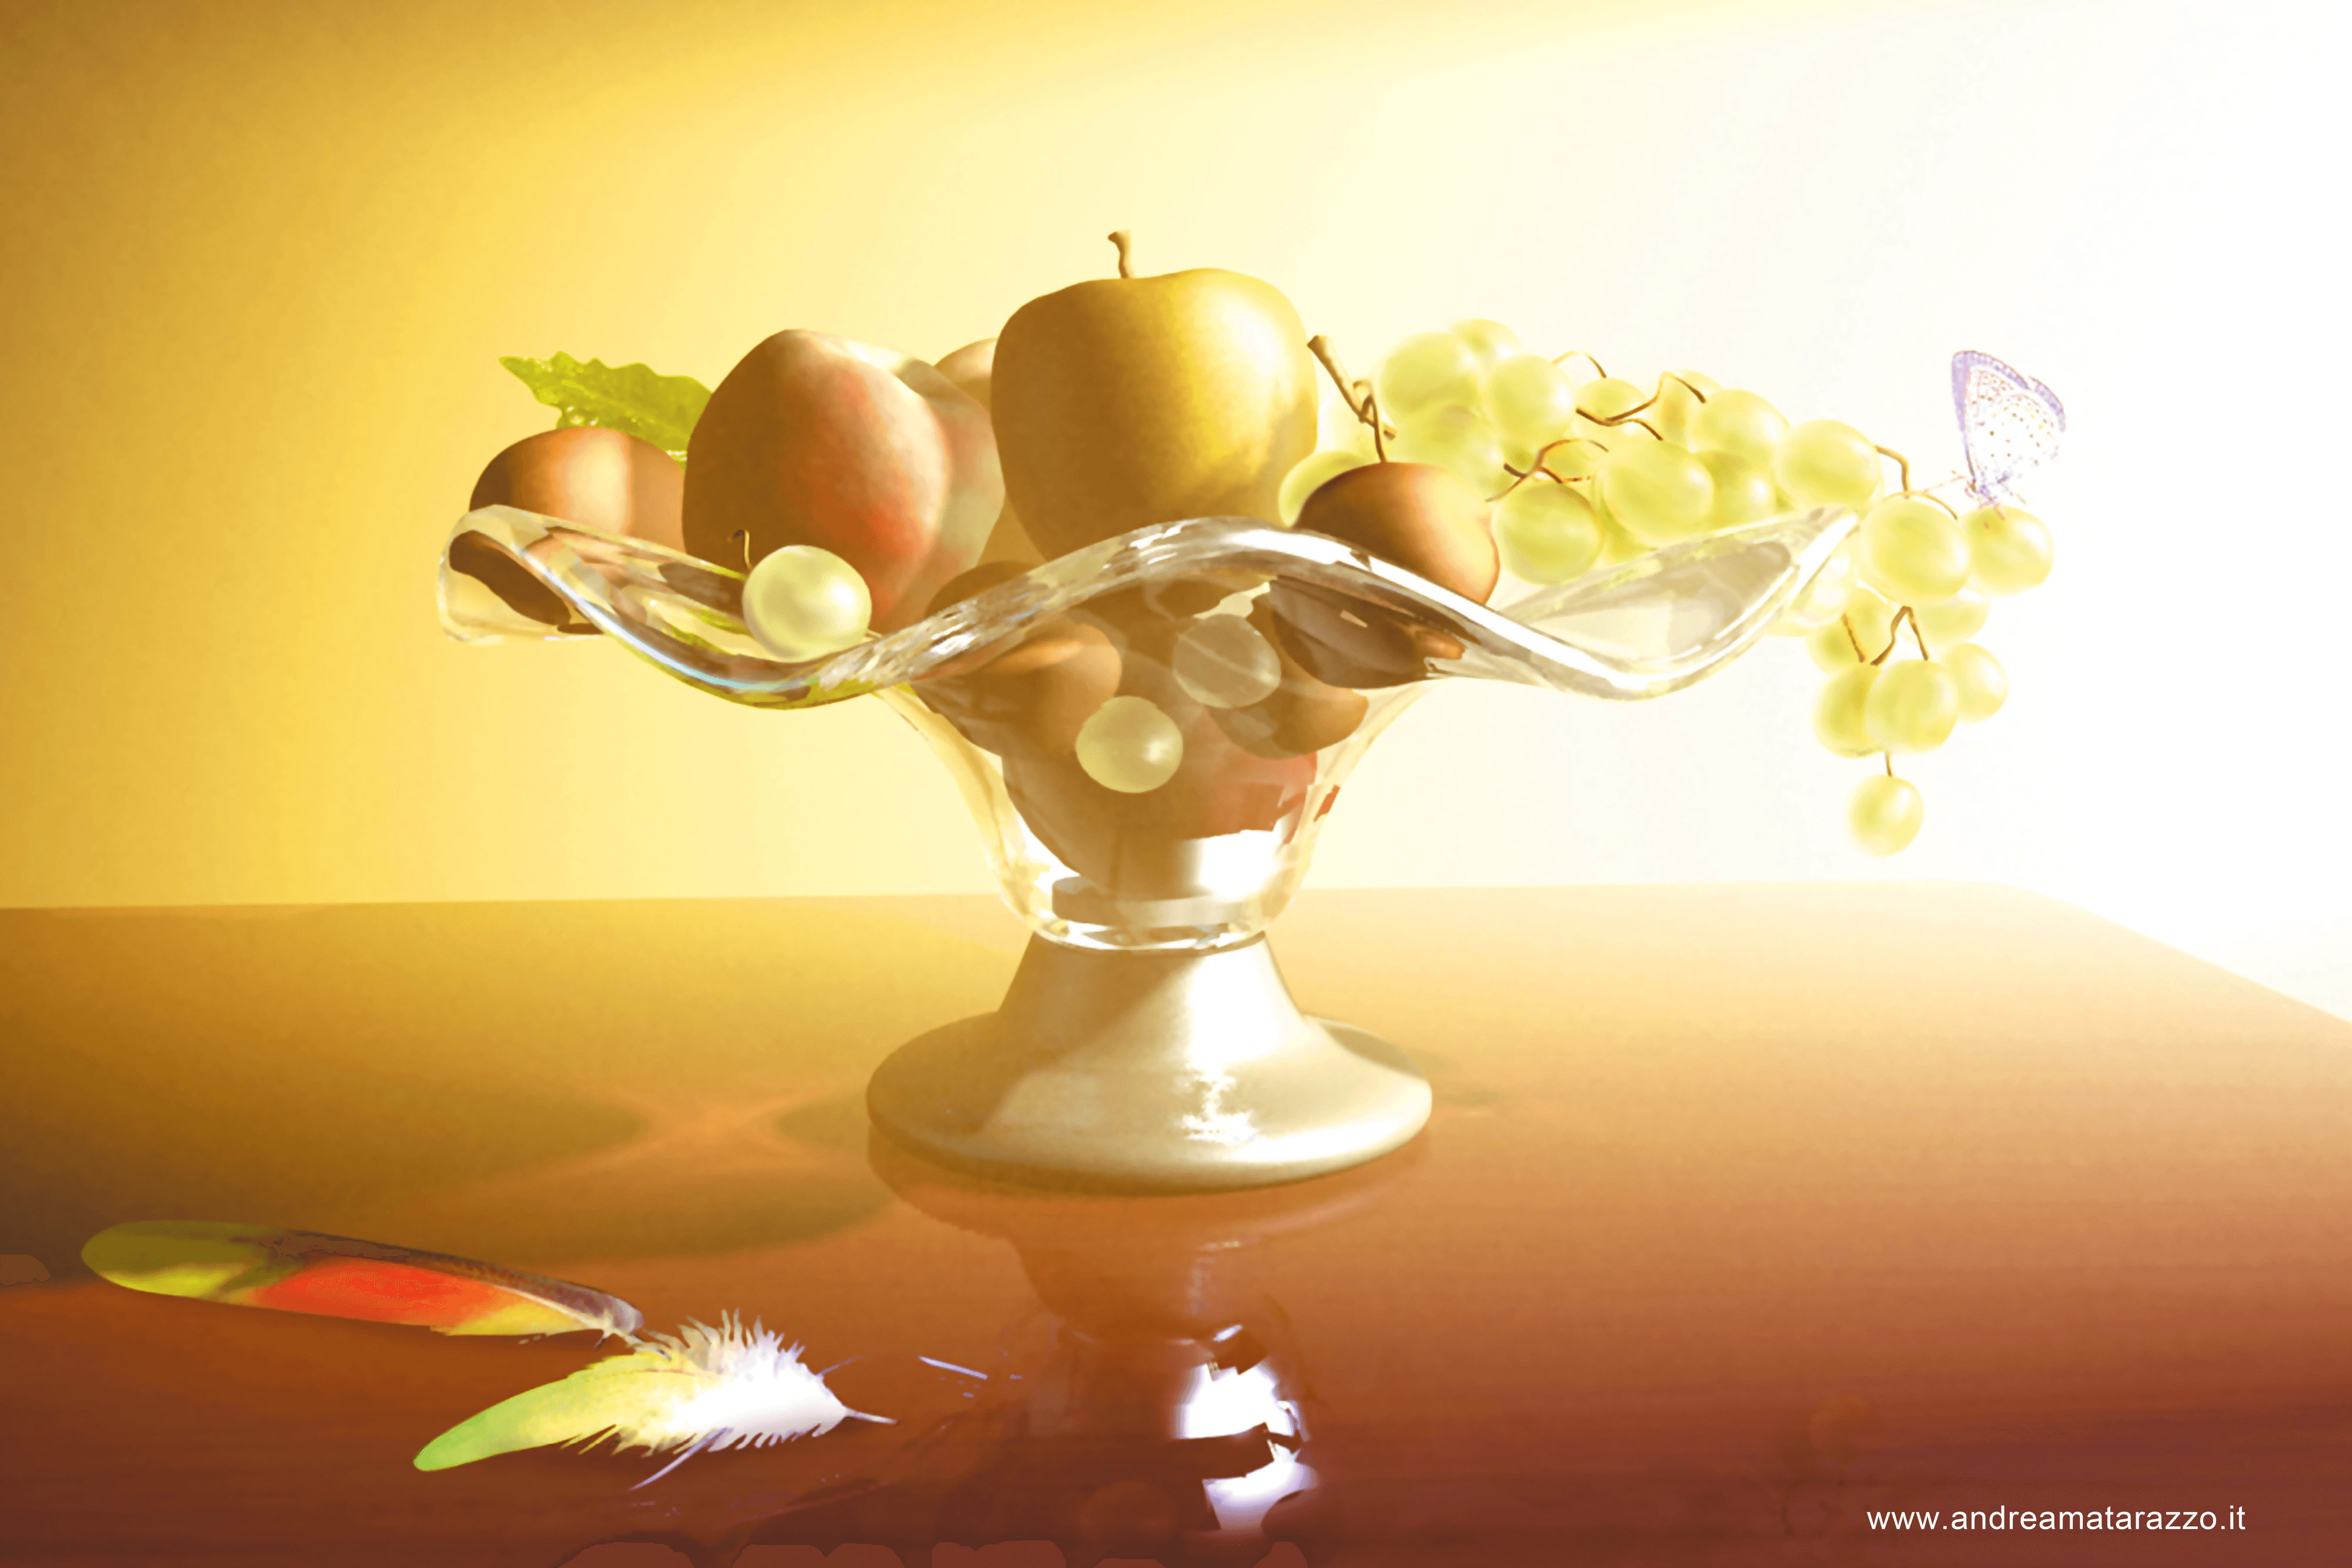 Basket of glass with fruits and batterfly 1